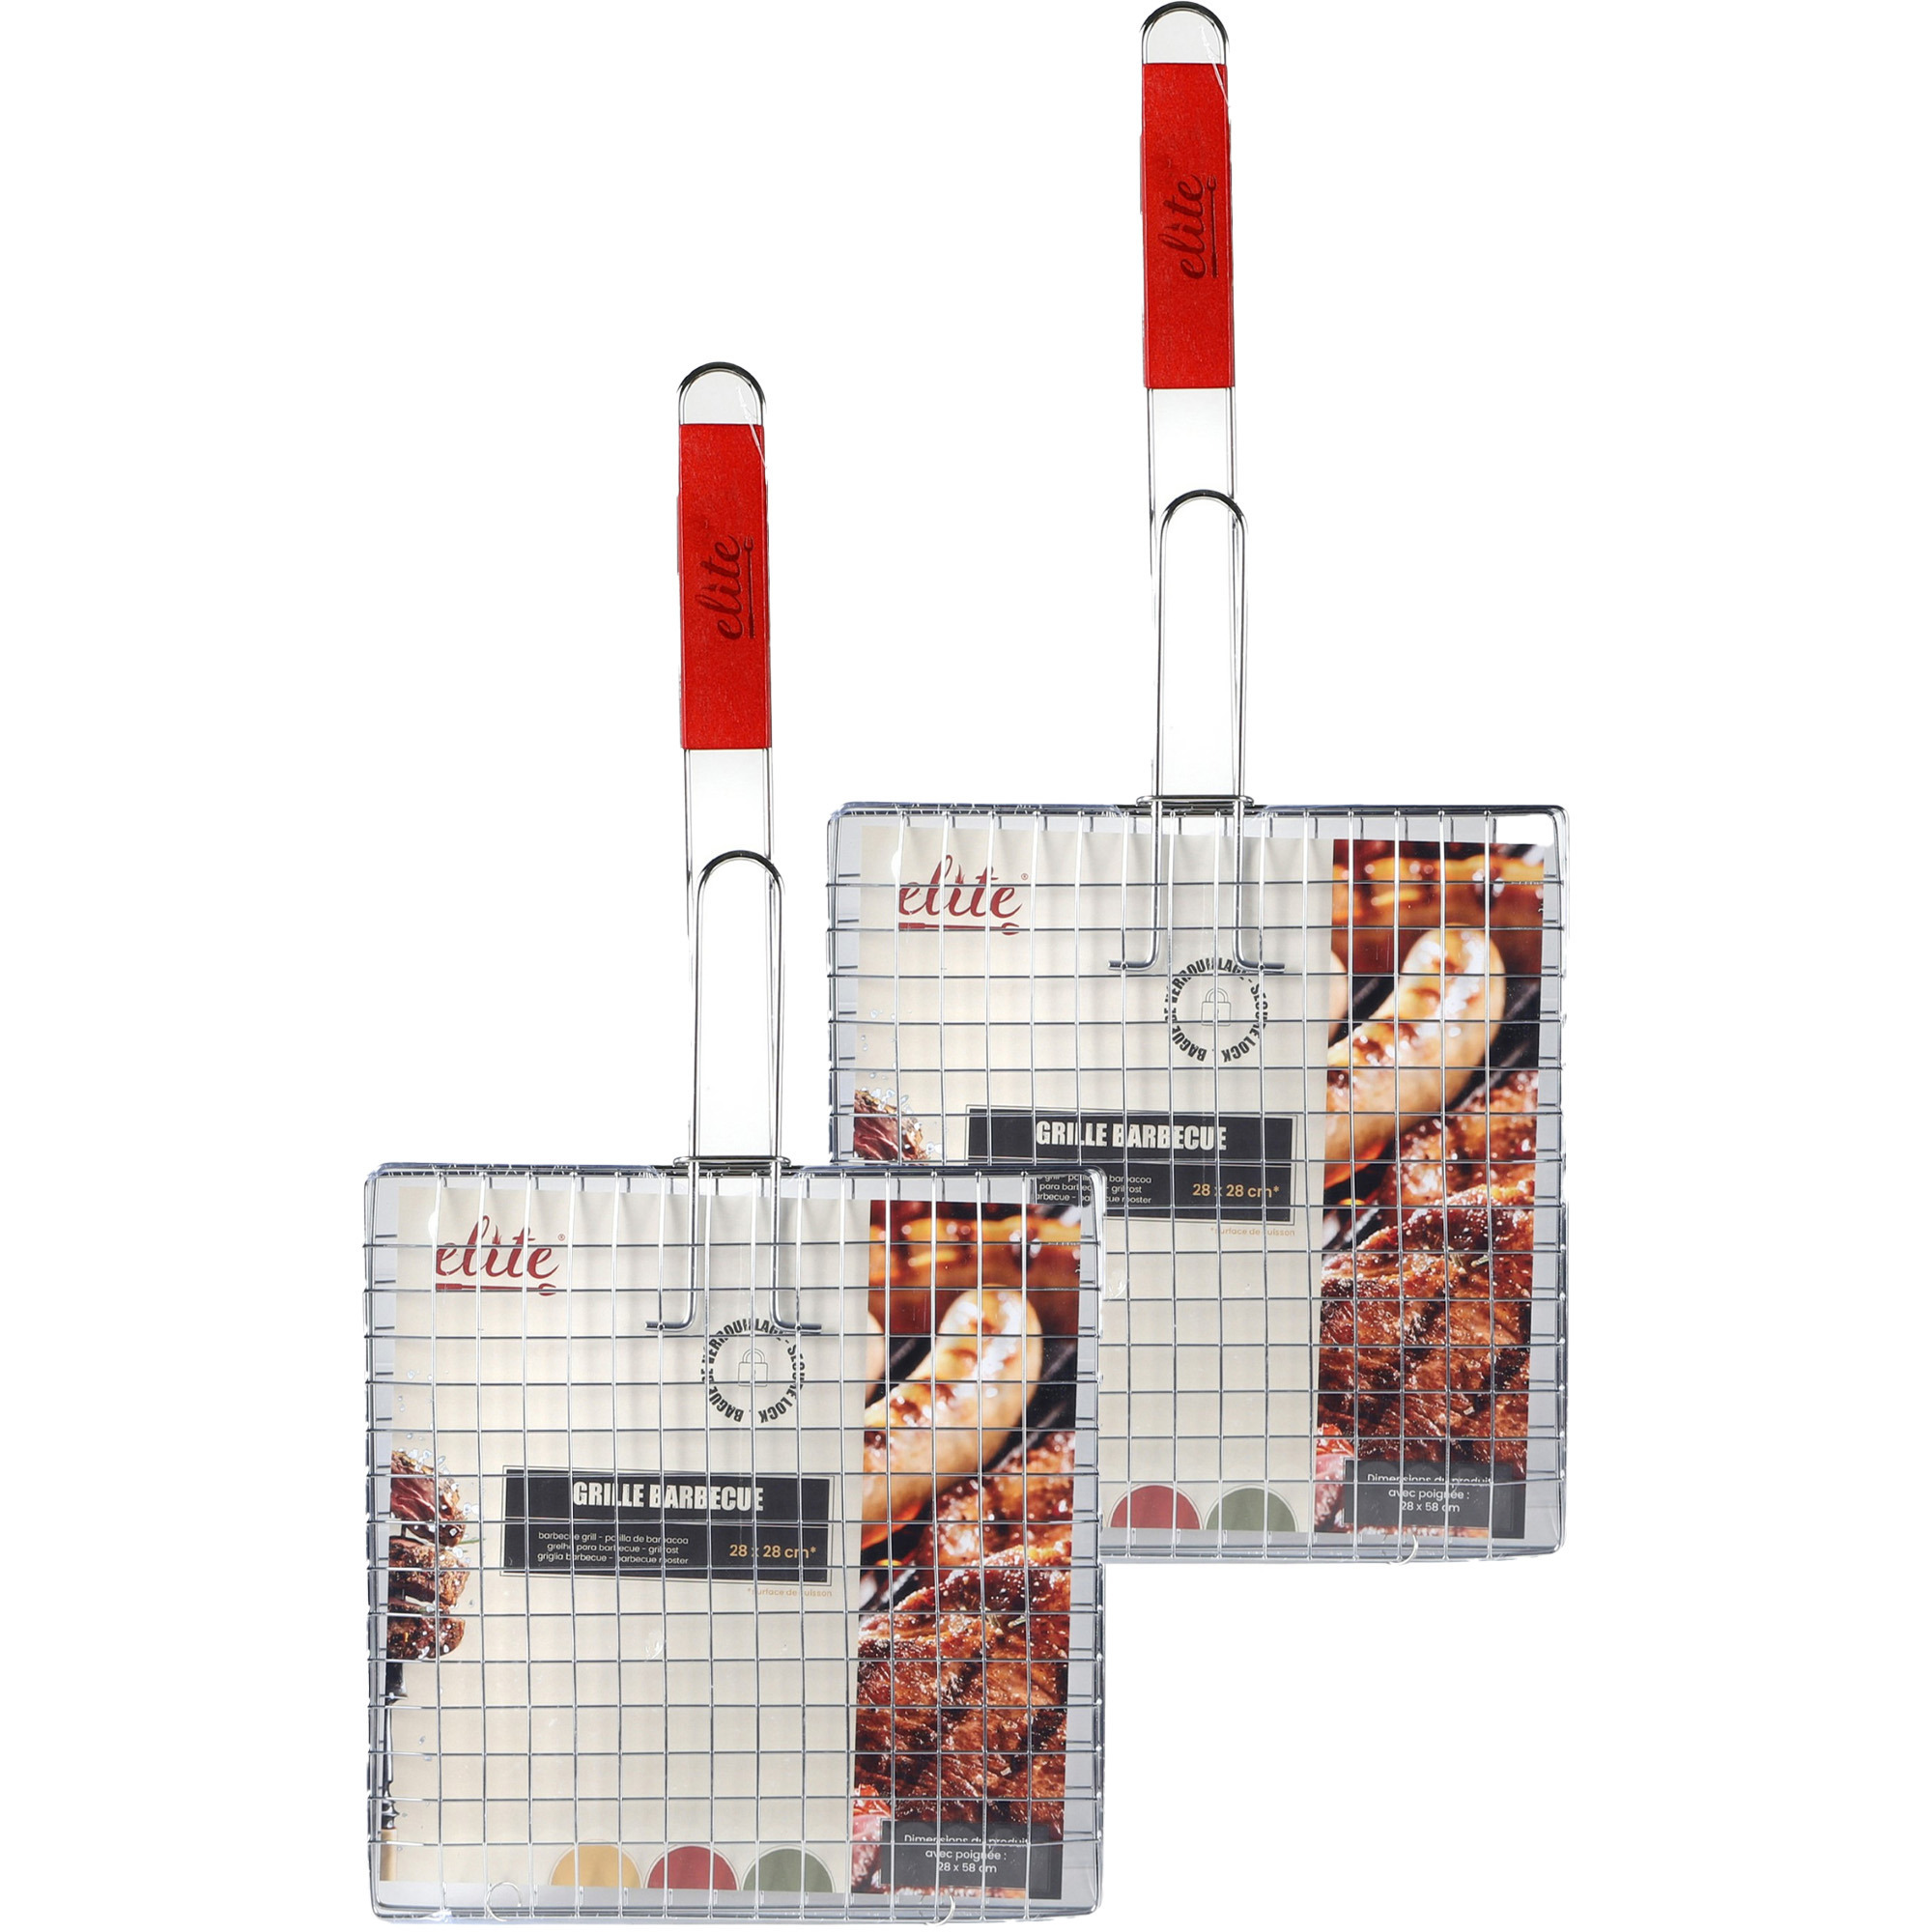 Elite BBQ-barbecue rooster 2x klem grill metaal-hout 28 x 58 x 1 cm